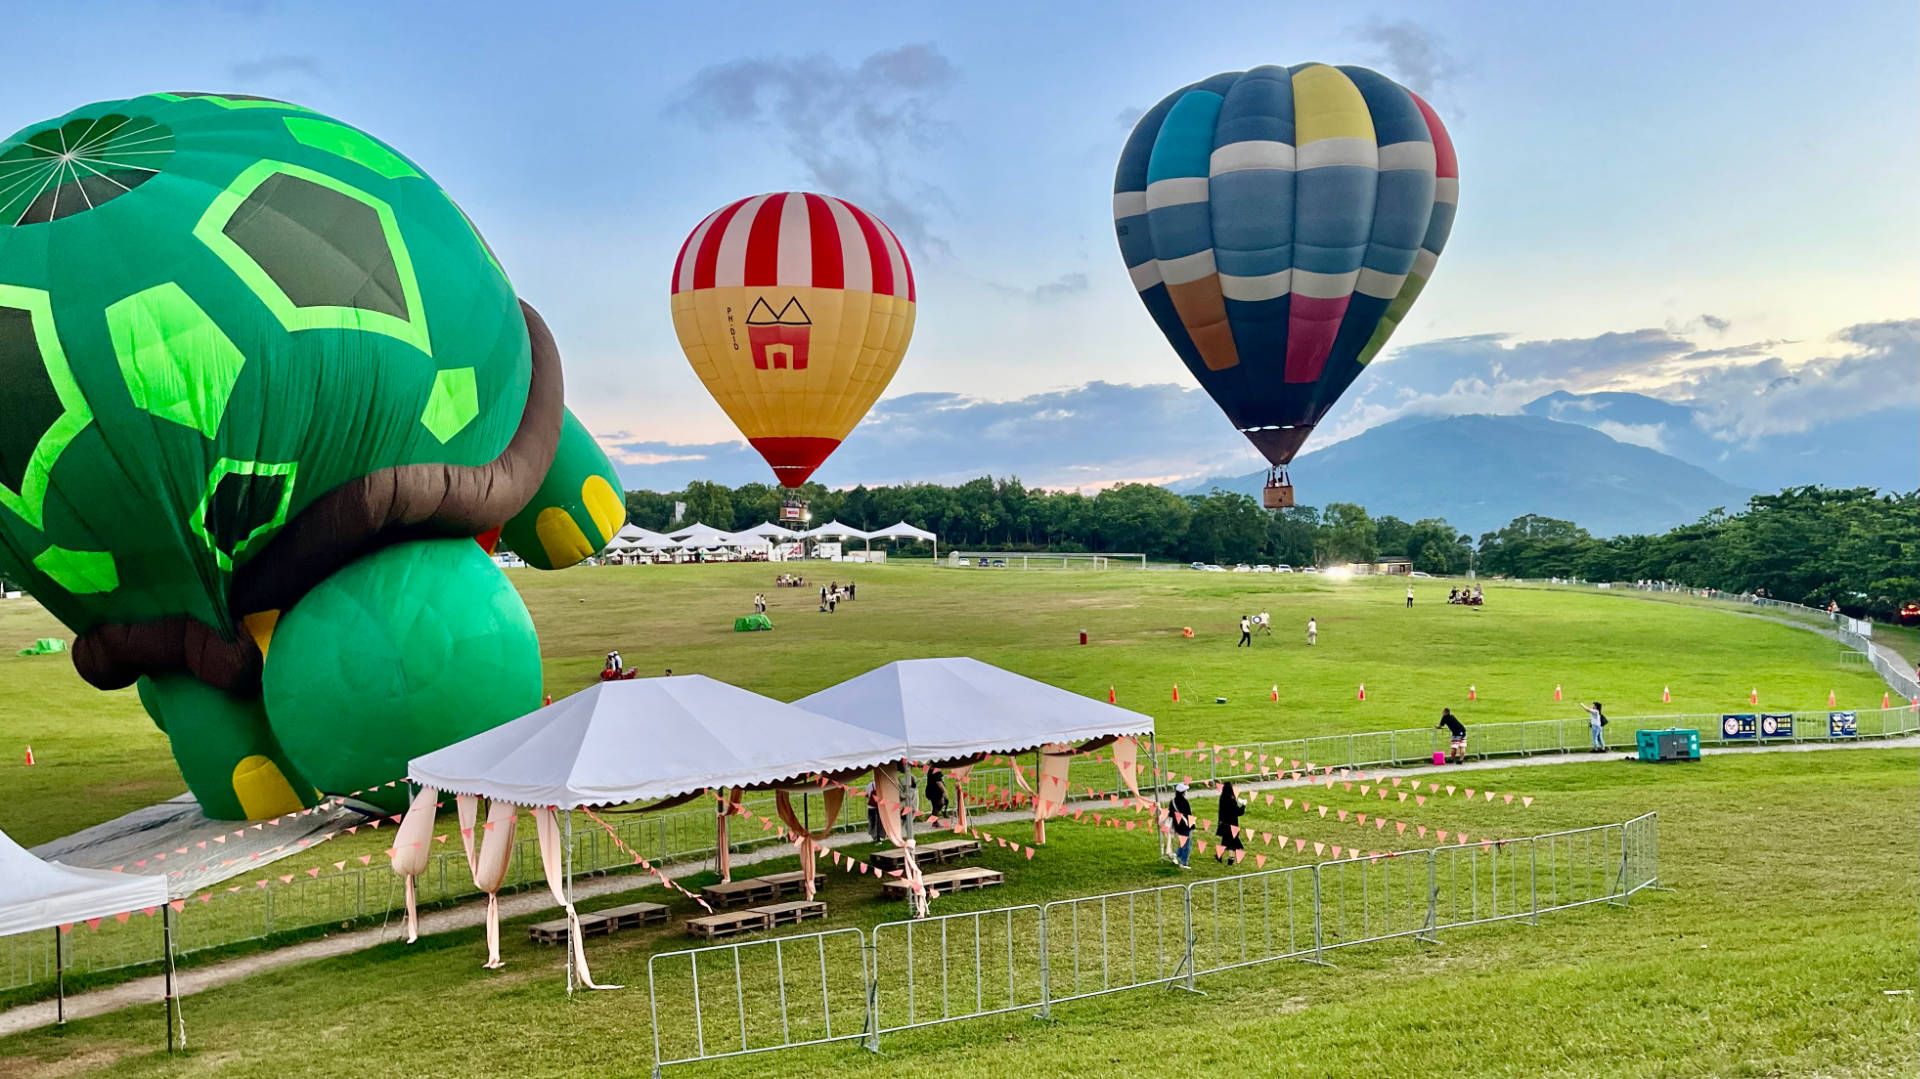 In the foreground, a large turtle-shaped hot air balloon is partially inflated, while two conventionally-shaped balloons are flying behind it. Each is around 10 meters off the ground.